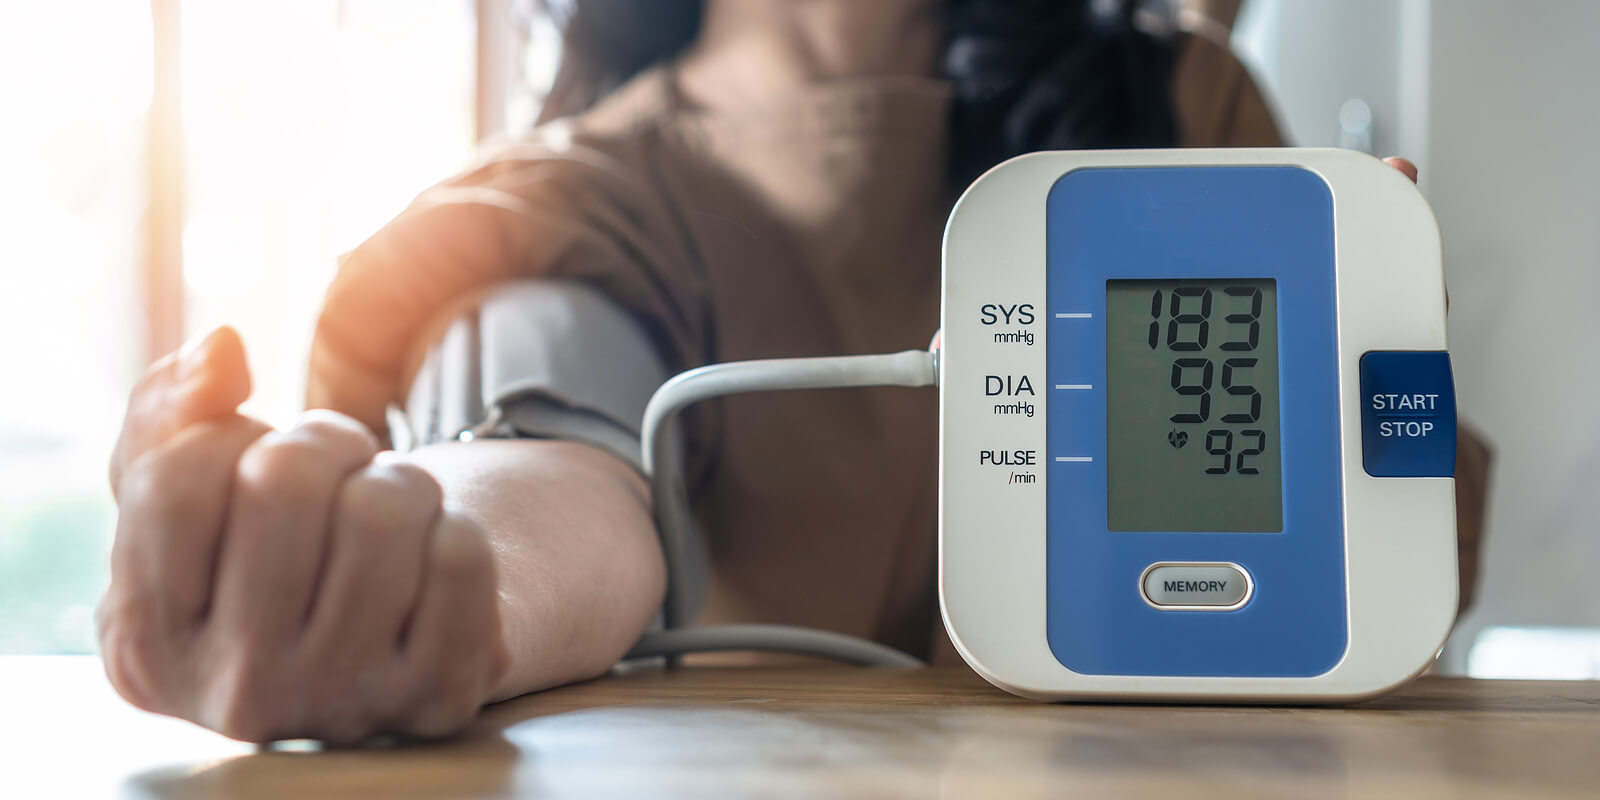 Taking your blood pressure at home is easy